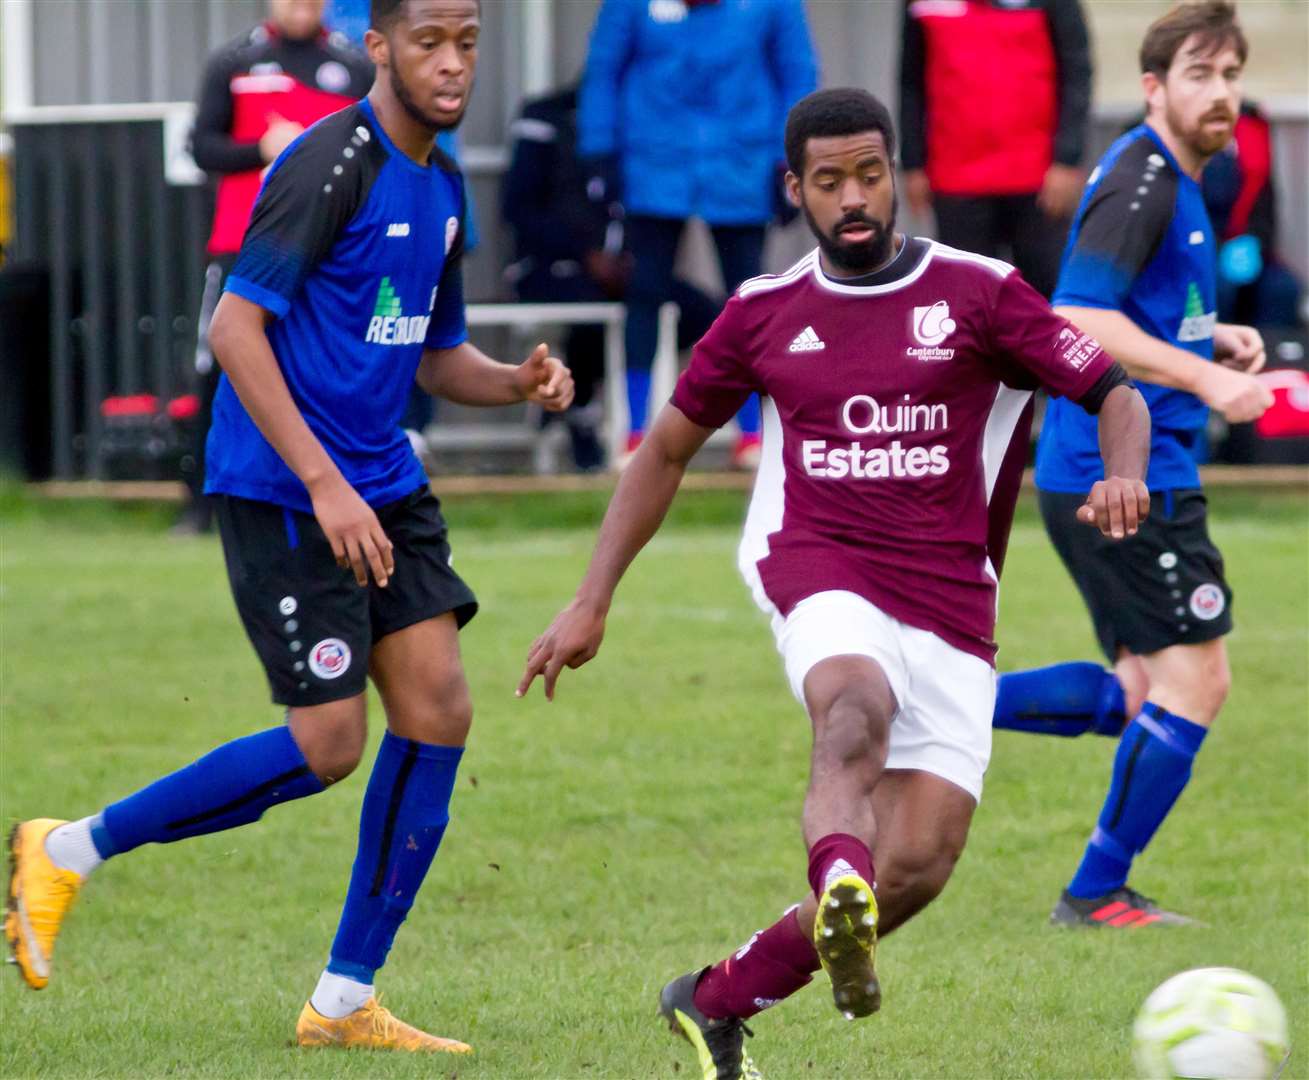 Canterbury City (maroon) are ninth in the Southern Counties East League Picture: David Mullaney